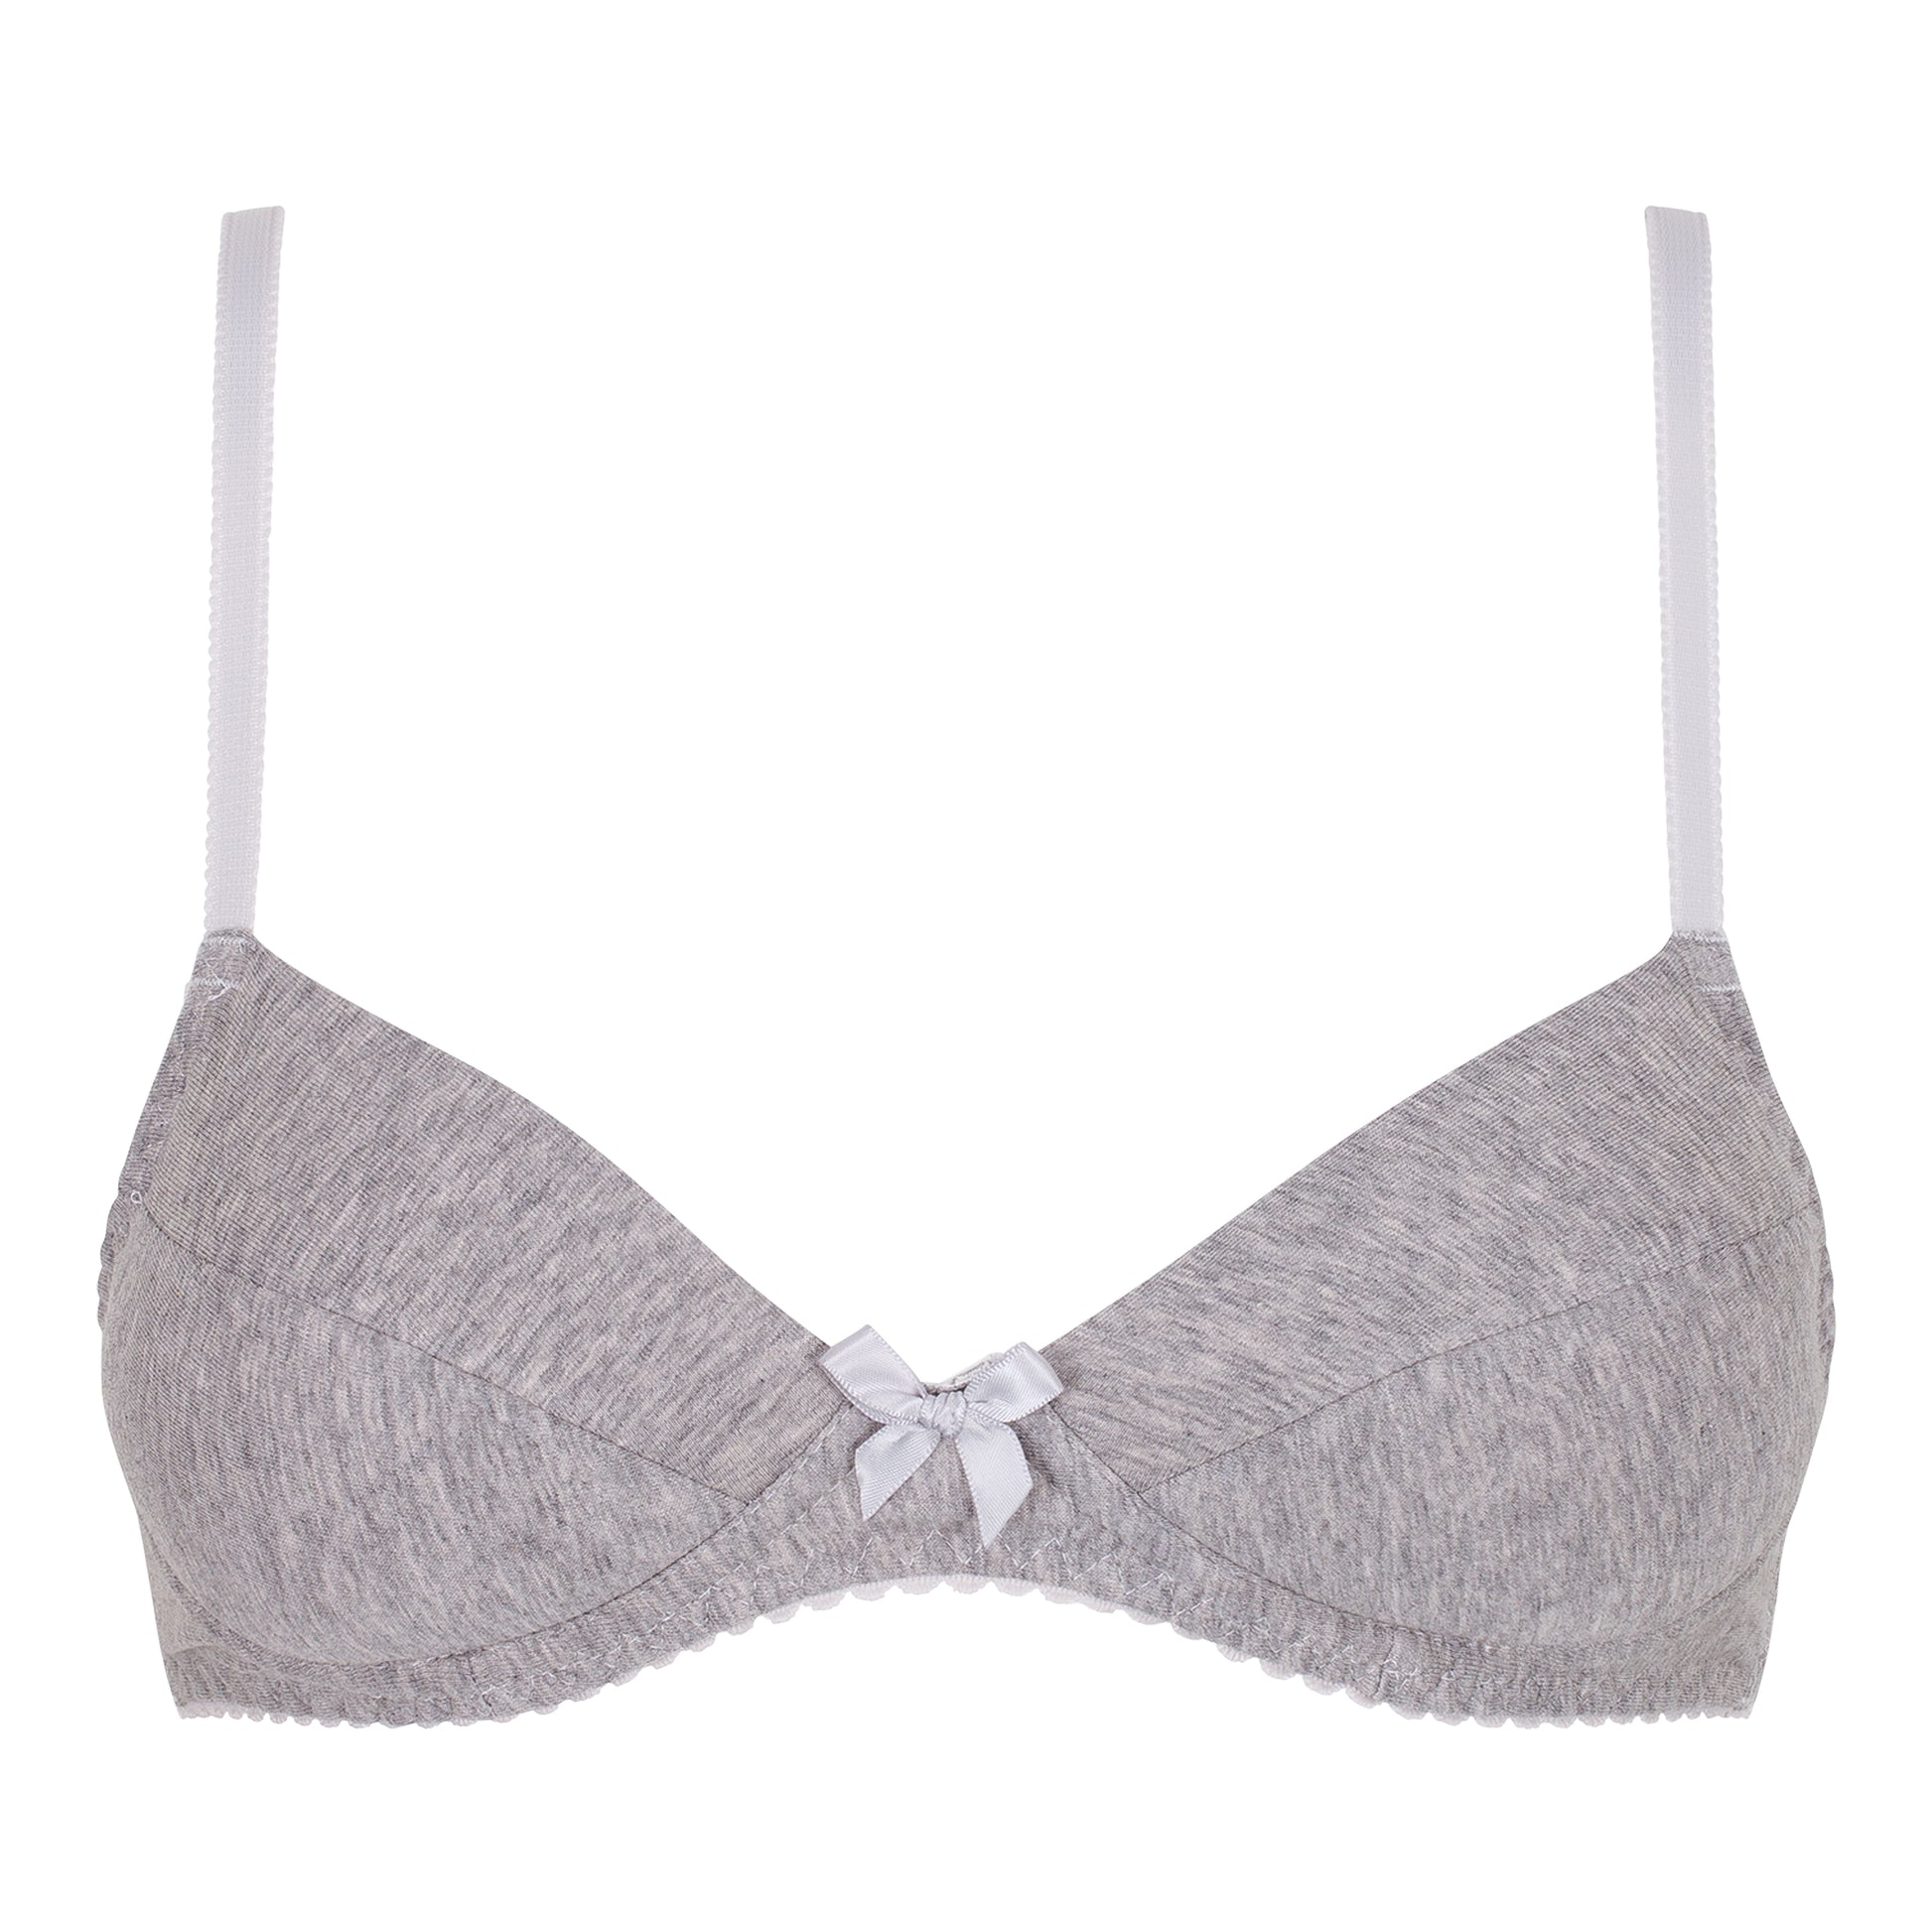 Stylish Intimate Apparel for Smaller Bra Sizes